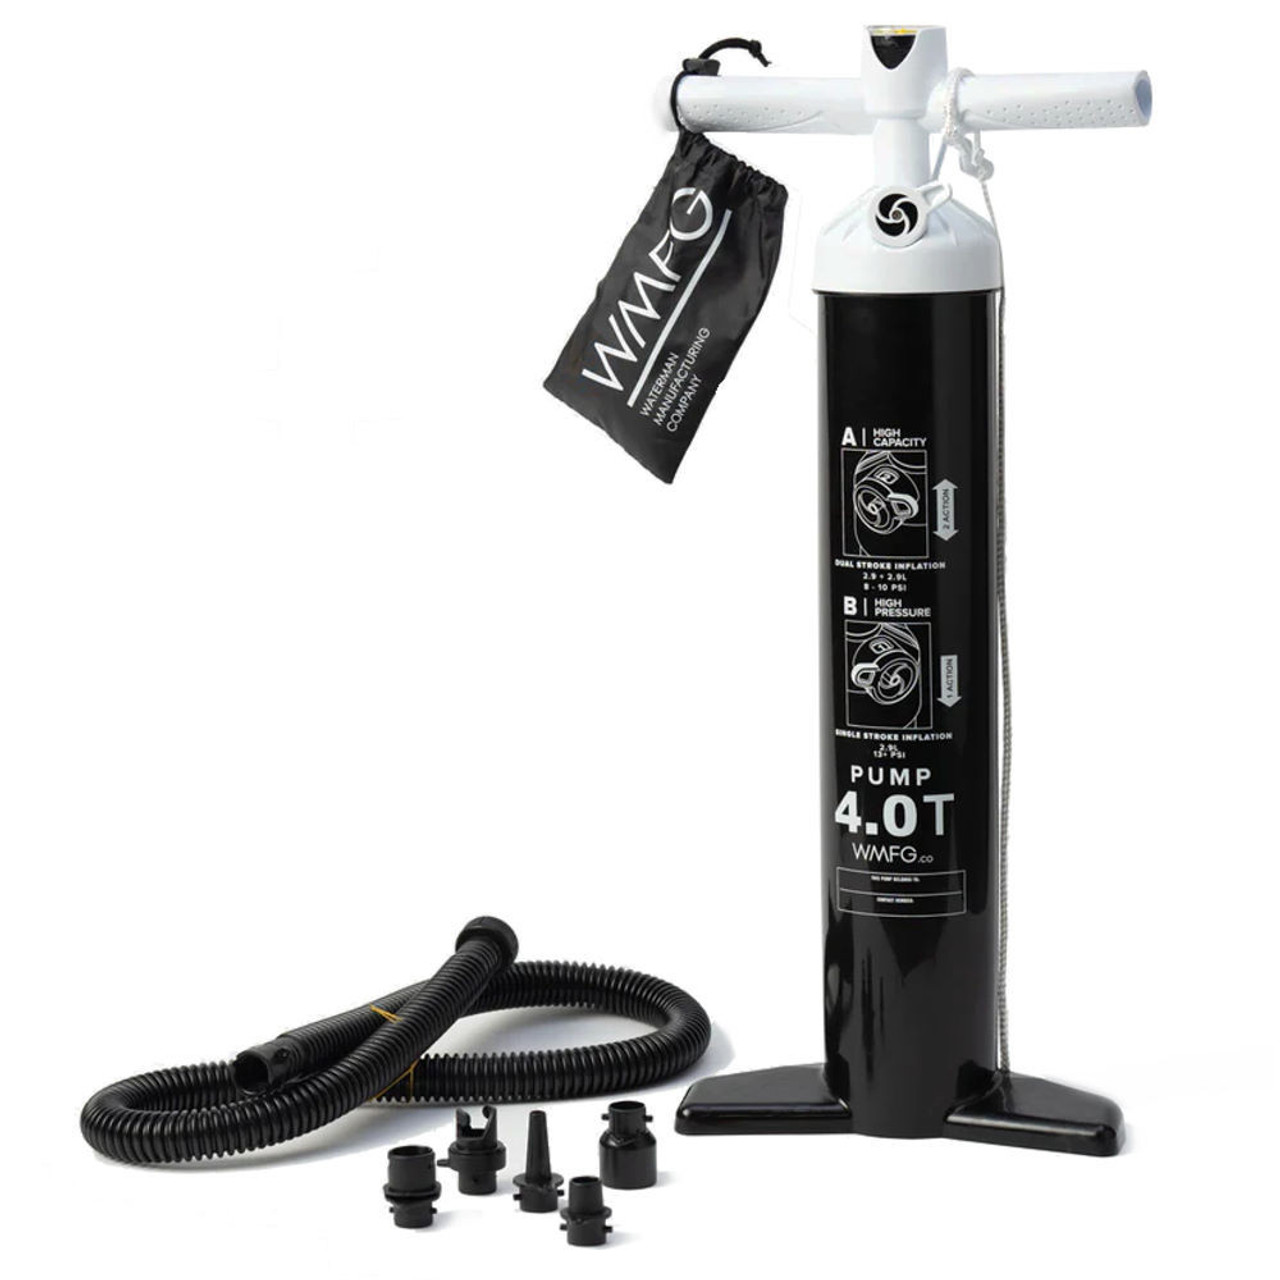 Dual Chamber Triple Action Pump, SUP Accessories